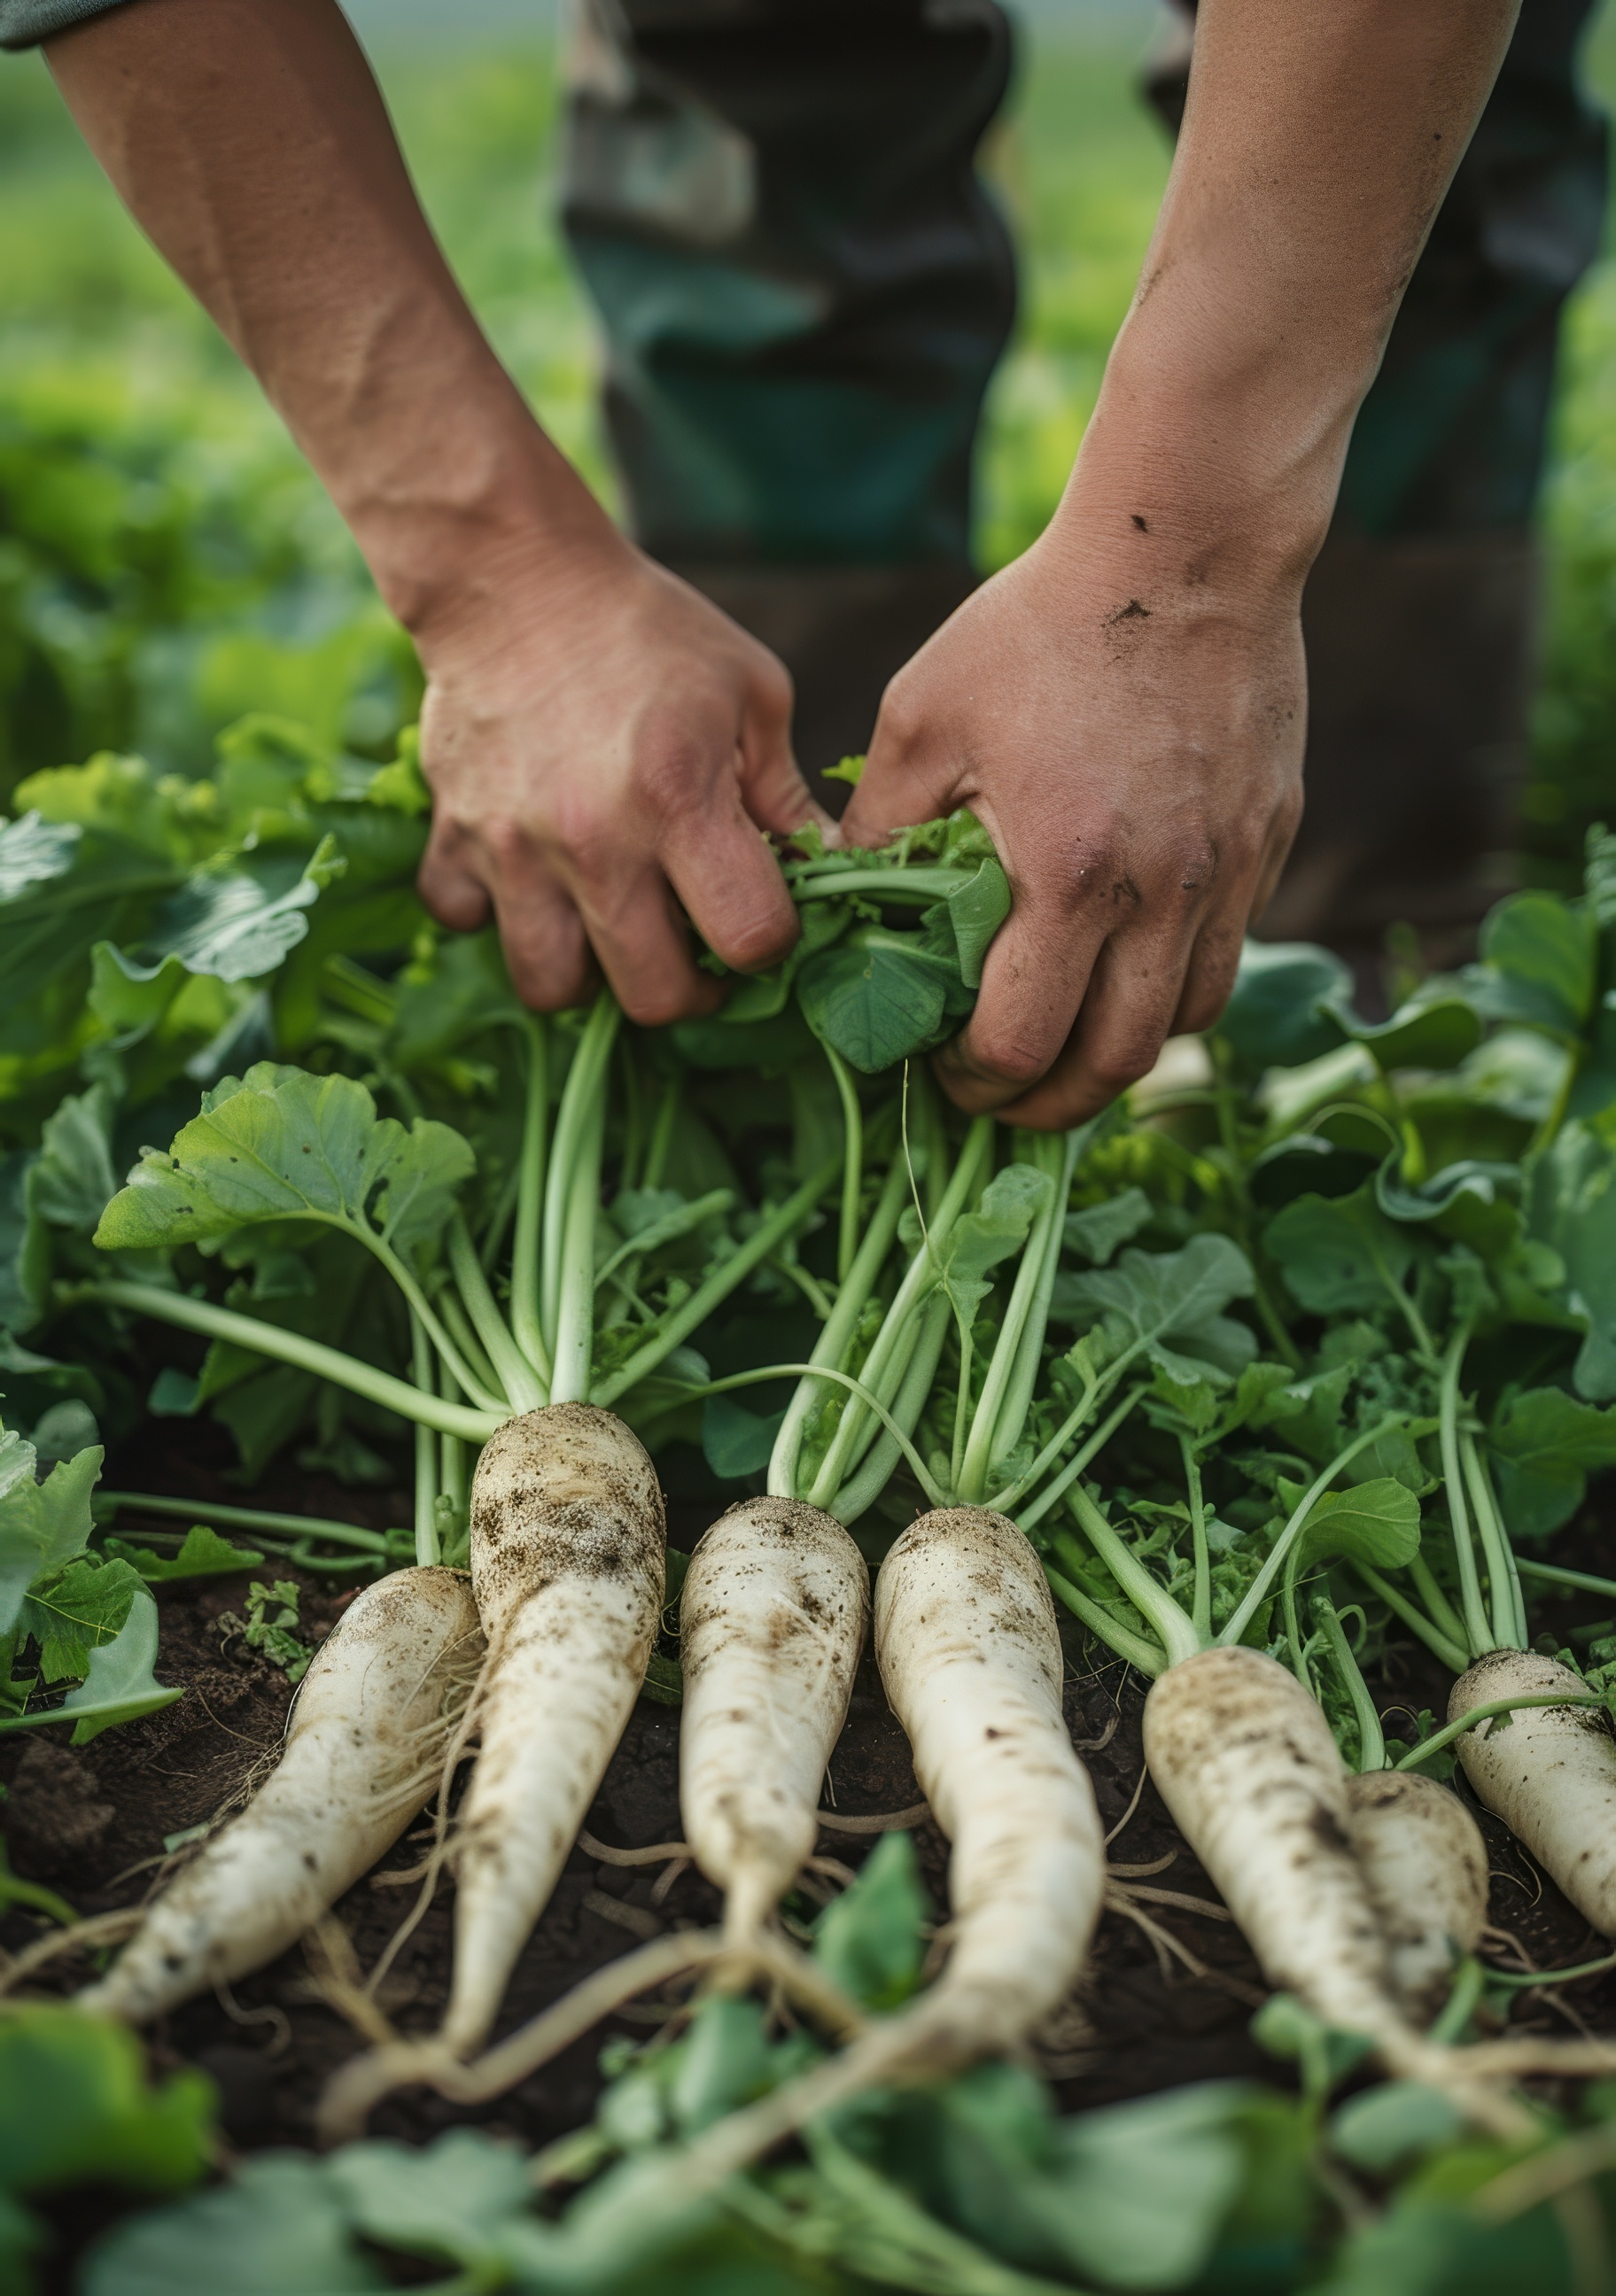 Hands pulling radishes from the radish field